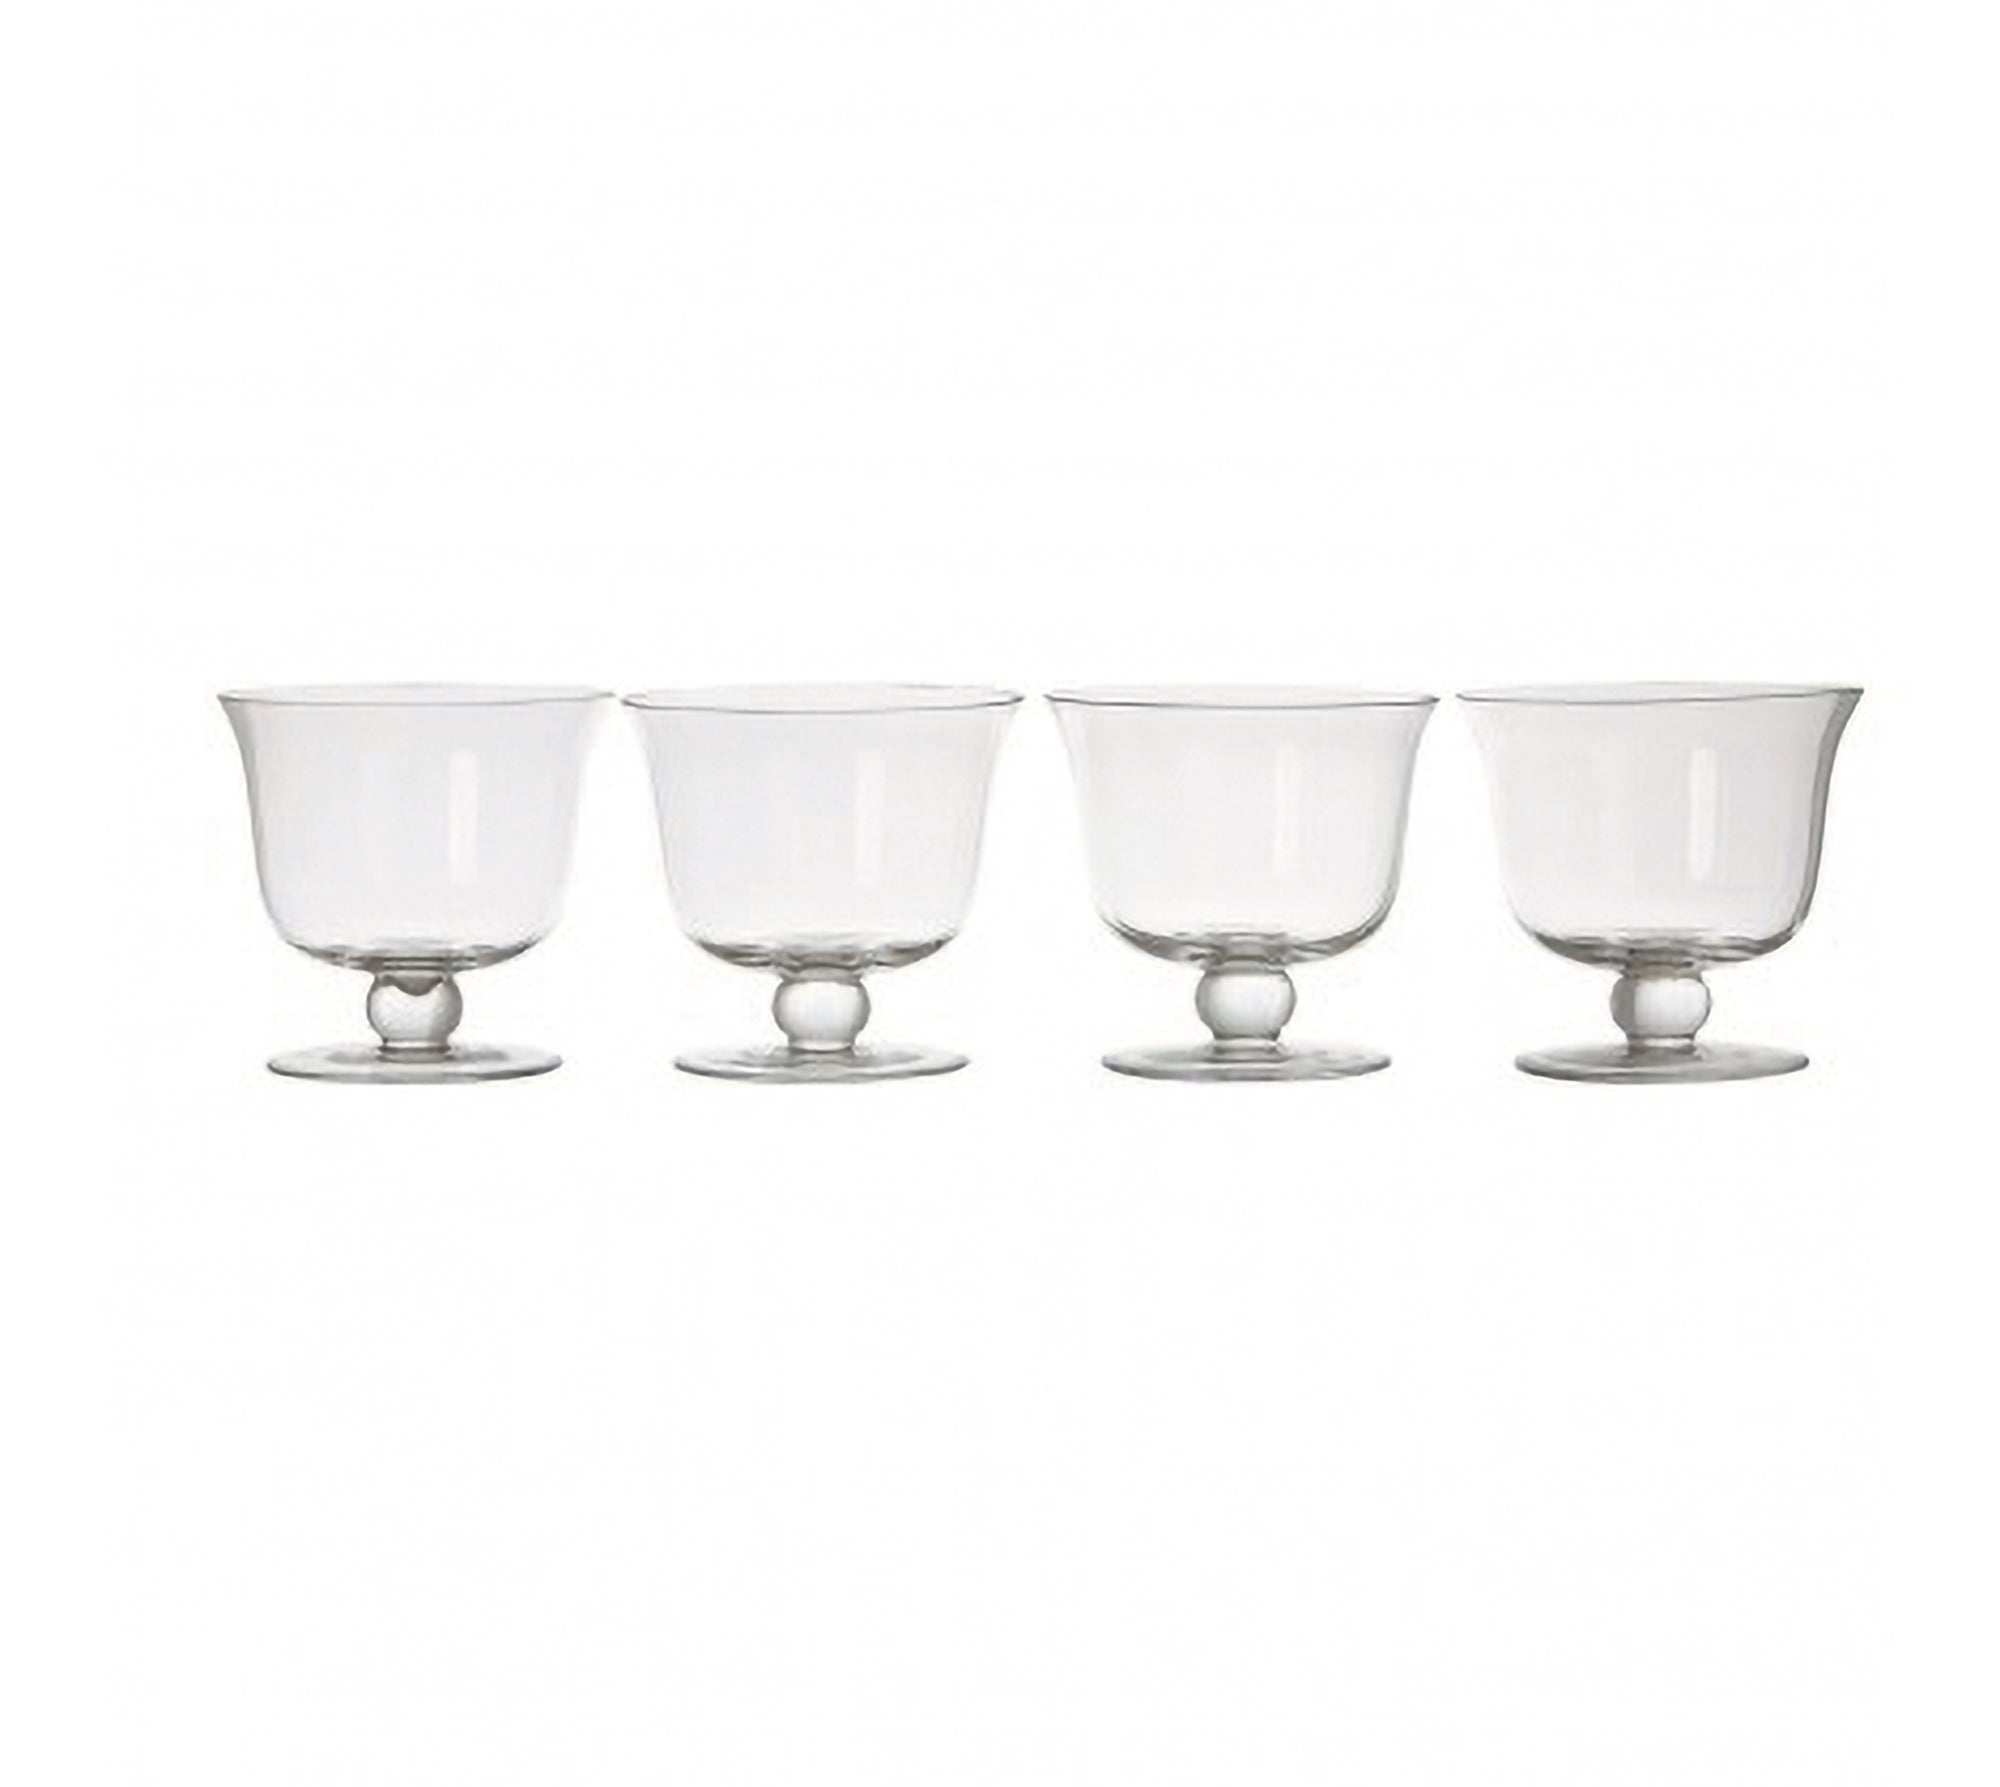 Clear Glass Dessert Dishes - Set of 4